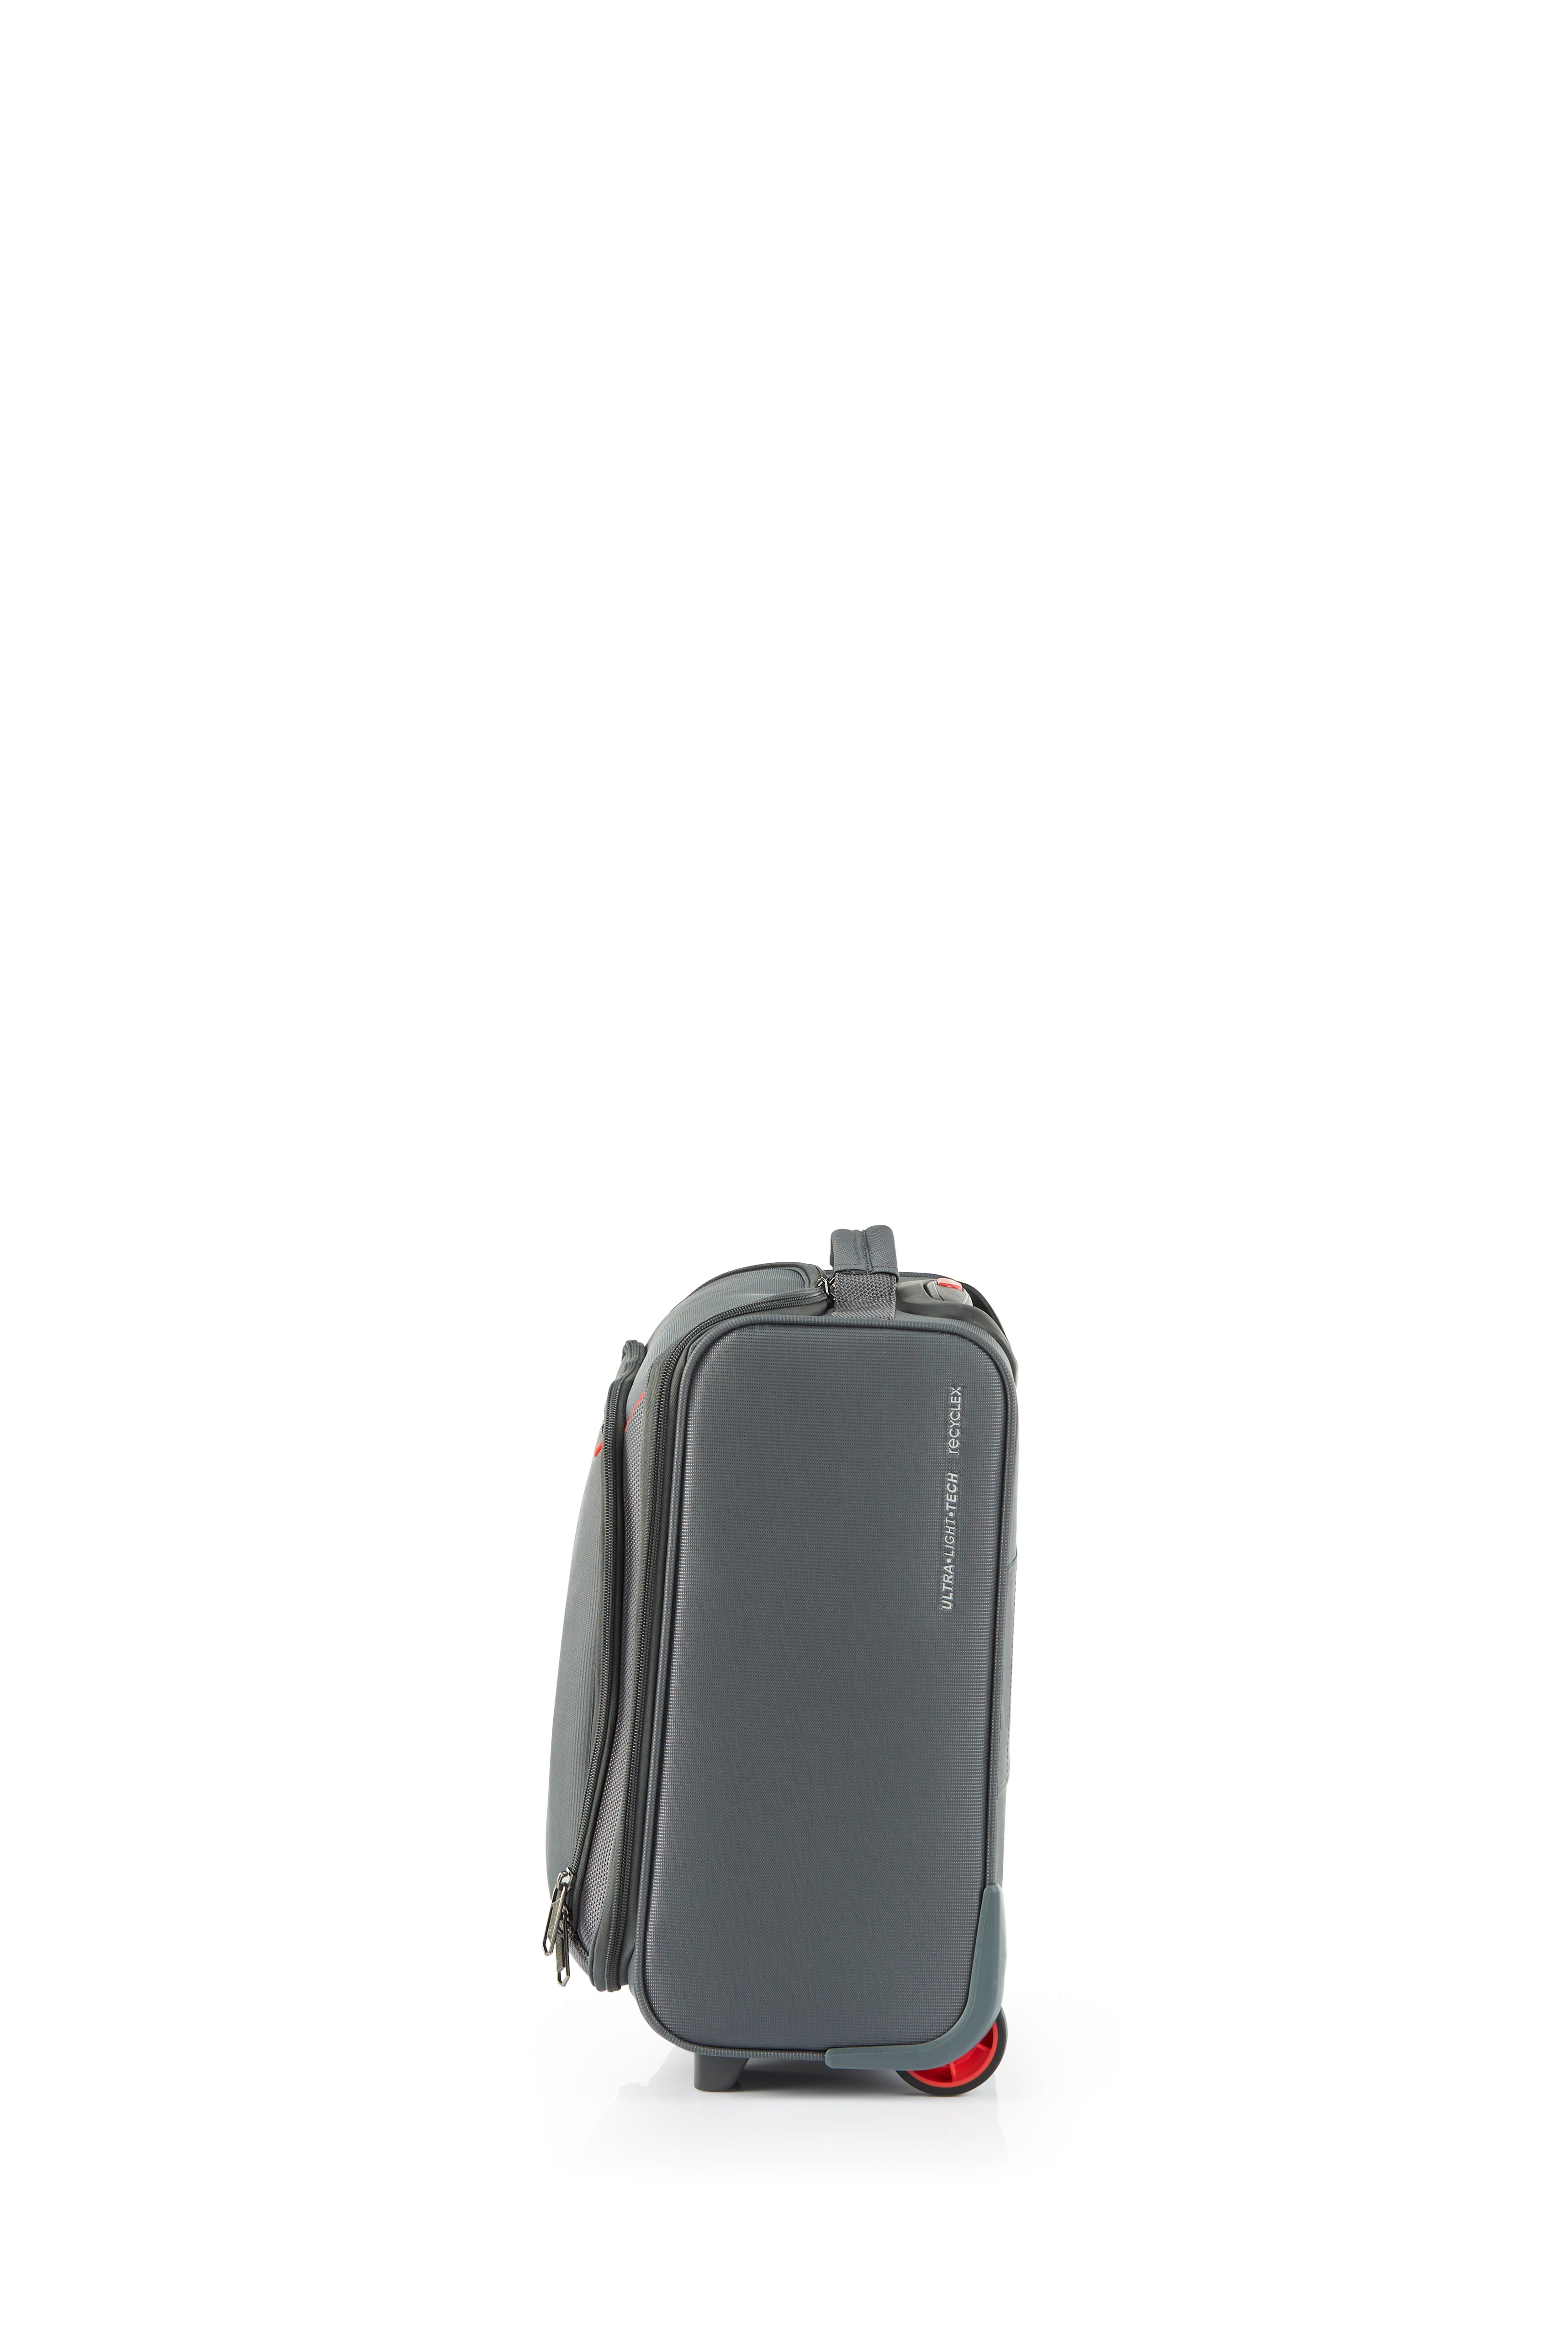 American Tourister - Applite ECO Underseater Suitcase - Grey/Red-4